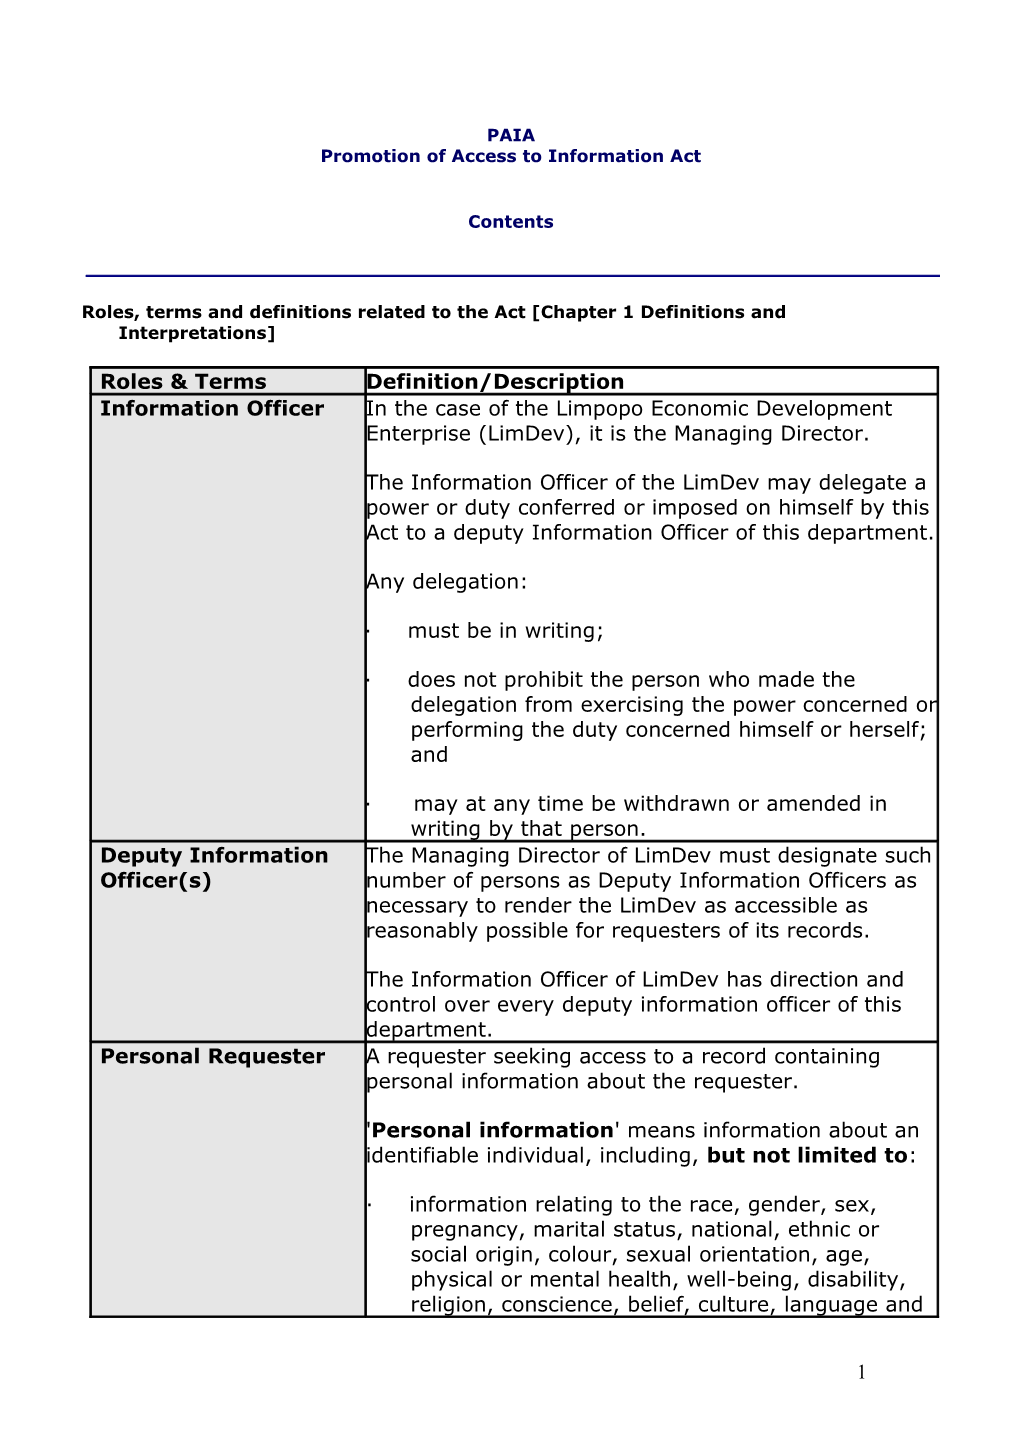 Roles, Terms and Definitions Related to the Act Chapter 1 Definitions and Interpretations